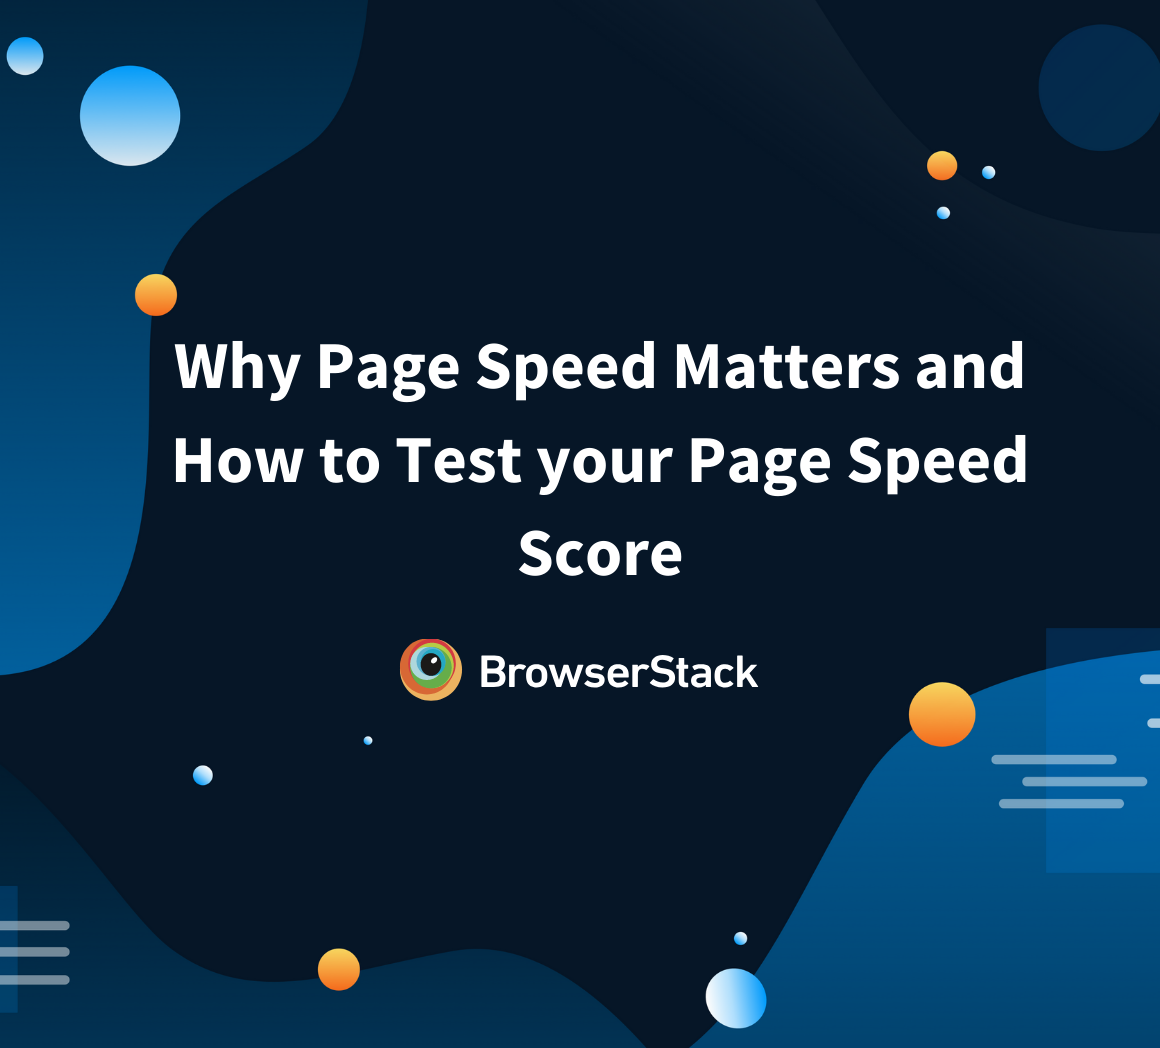 Why Page Speed Matters and How to Test your Page Speed Score